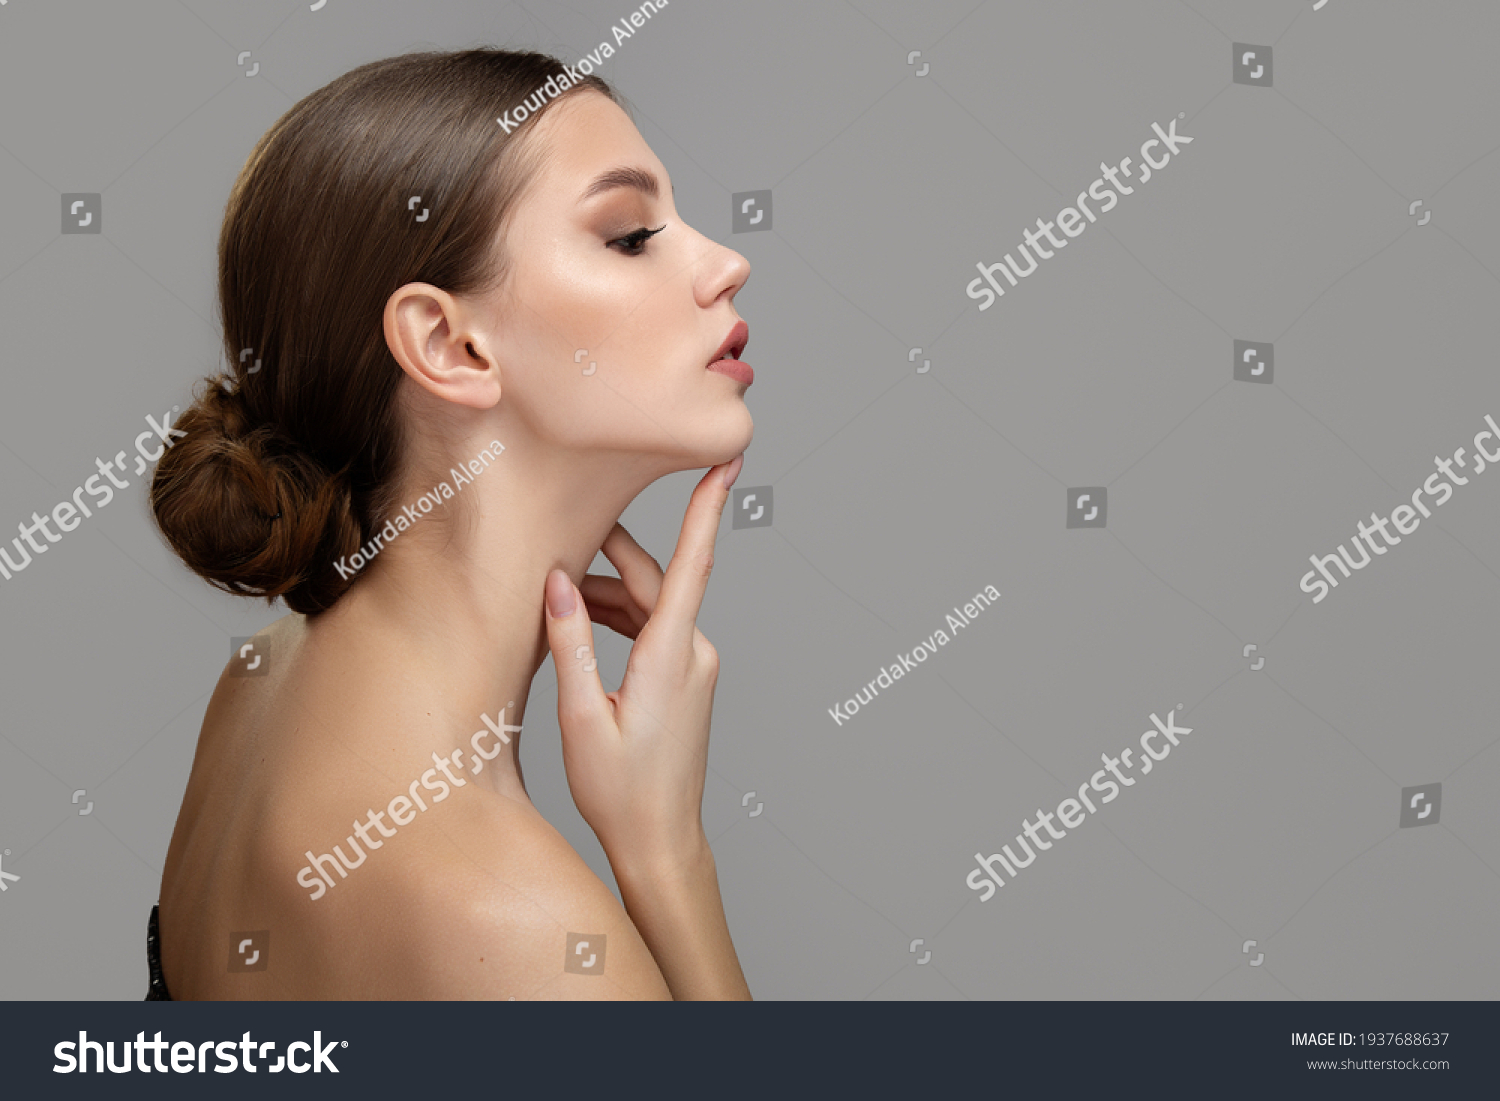 Woman face profile side view. Chin lift pointing with index finger #1937688637